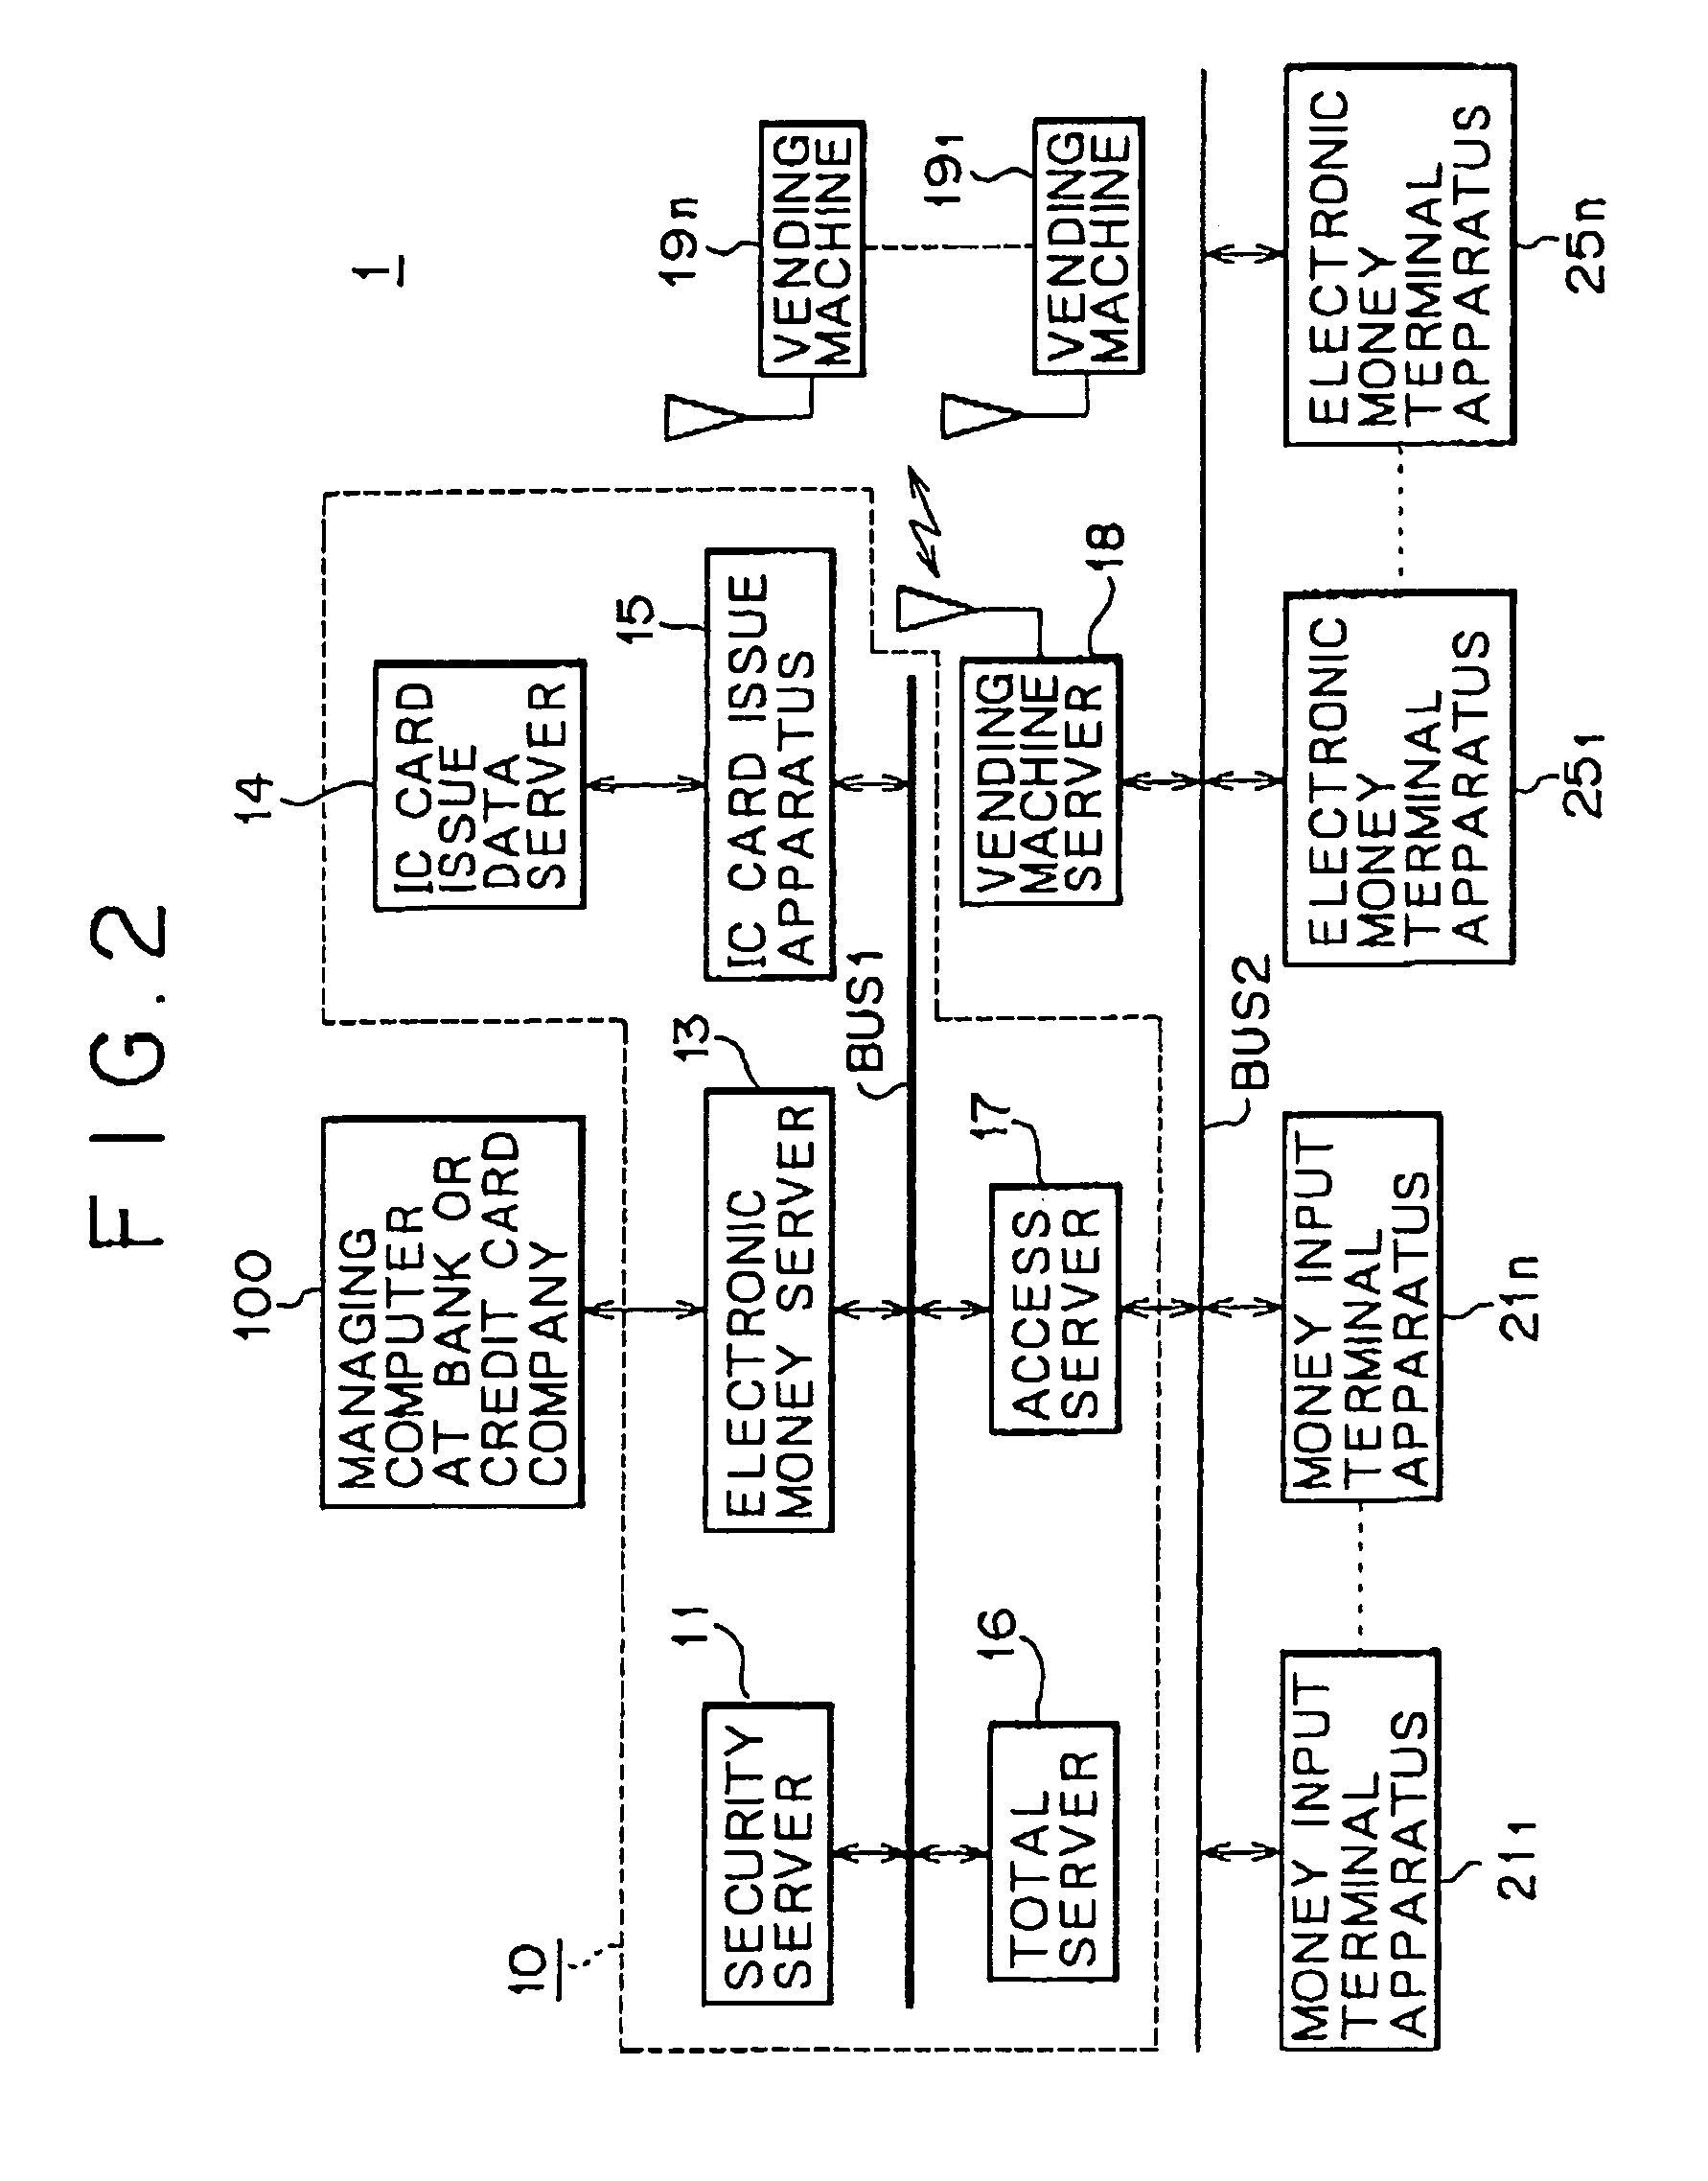 Electronic money system and payment accepting apparatus